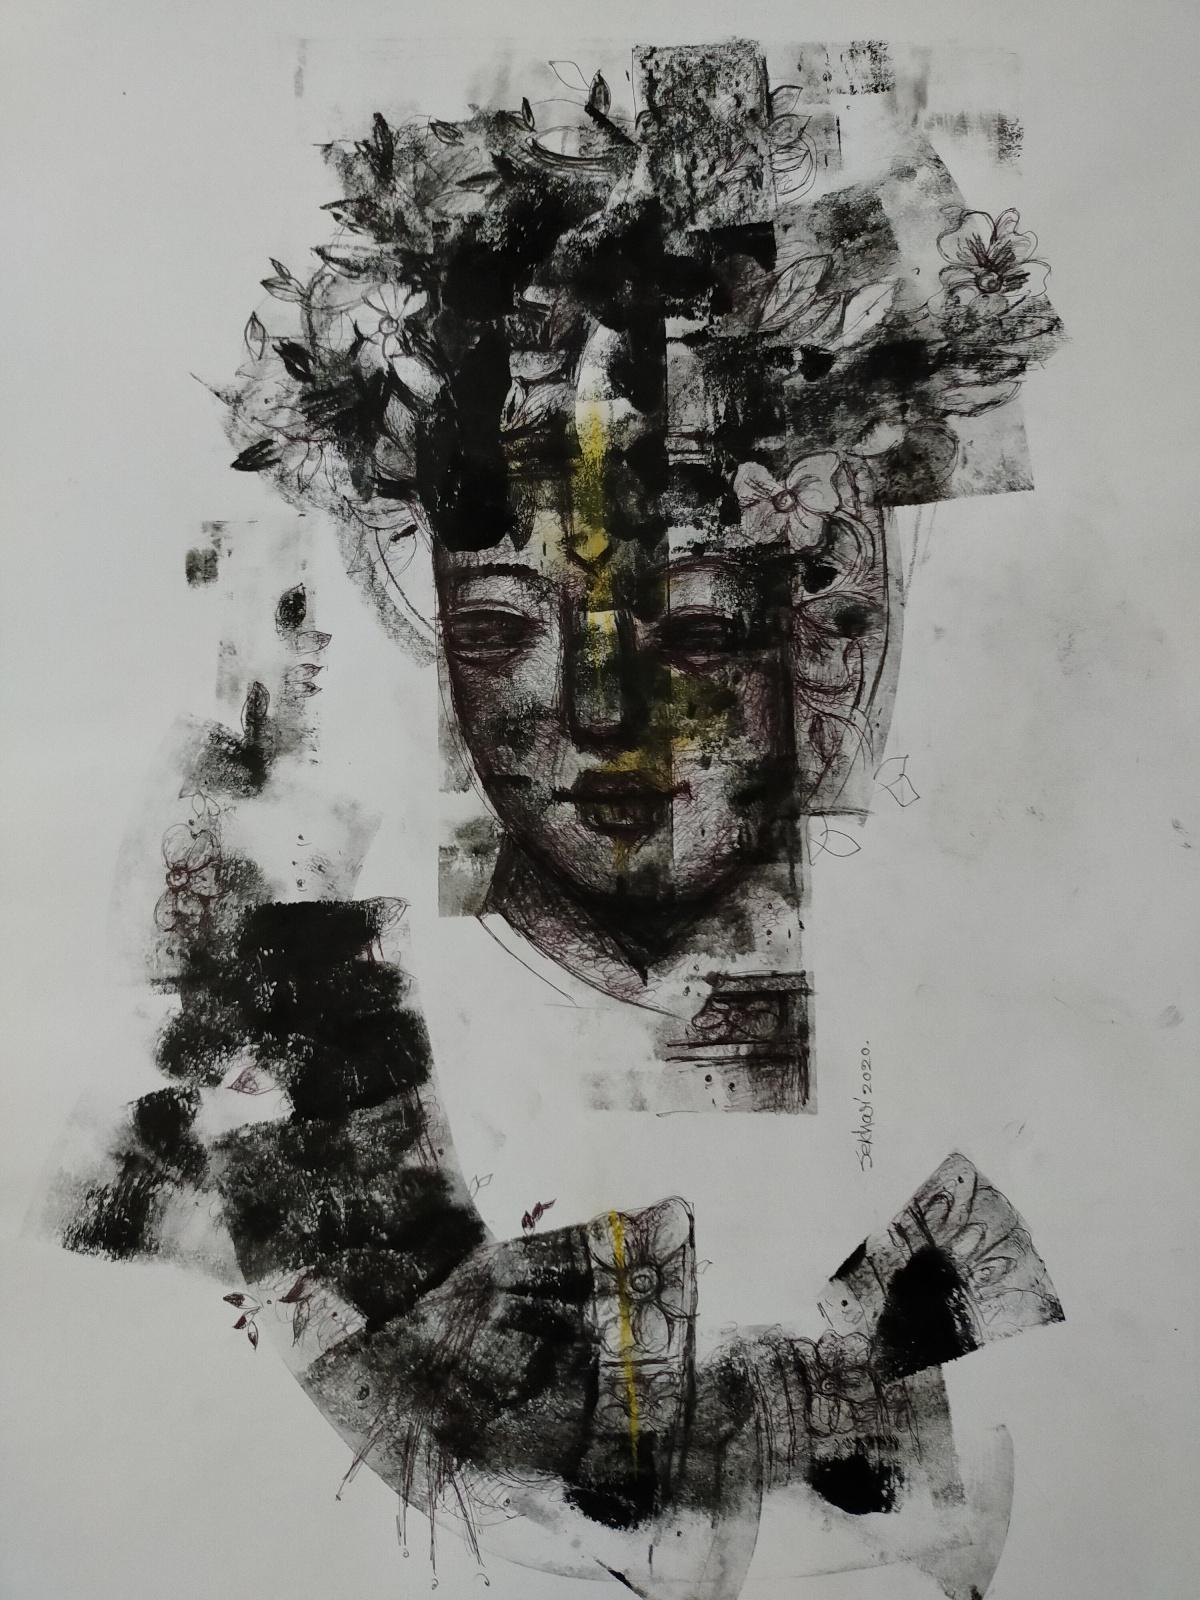 Untitled, Mixed Media on Paper, Black, White by Contemporary Artist "In Stock" - Mixed Media Art by Sekhar Kar